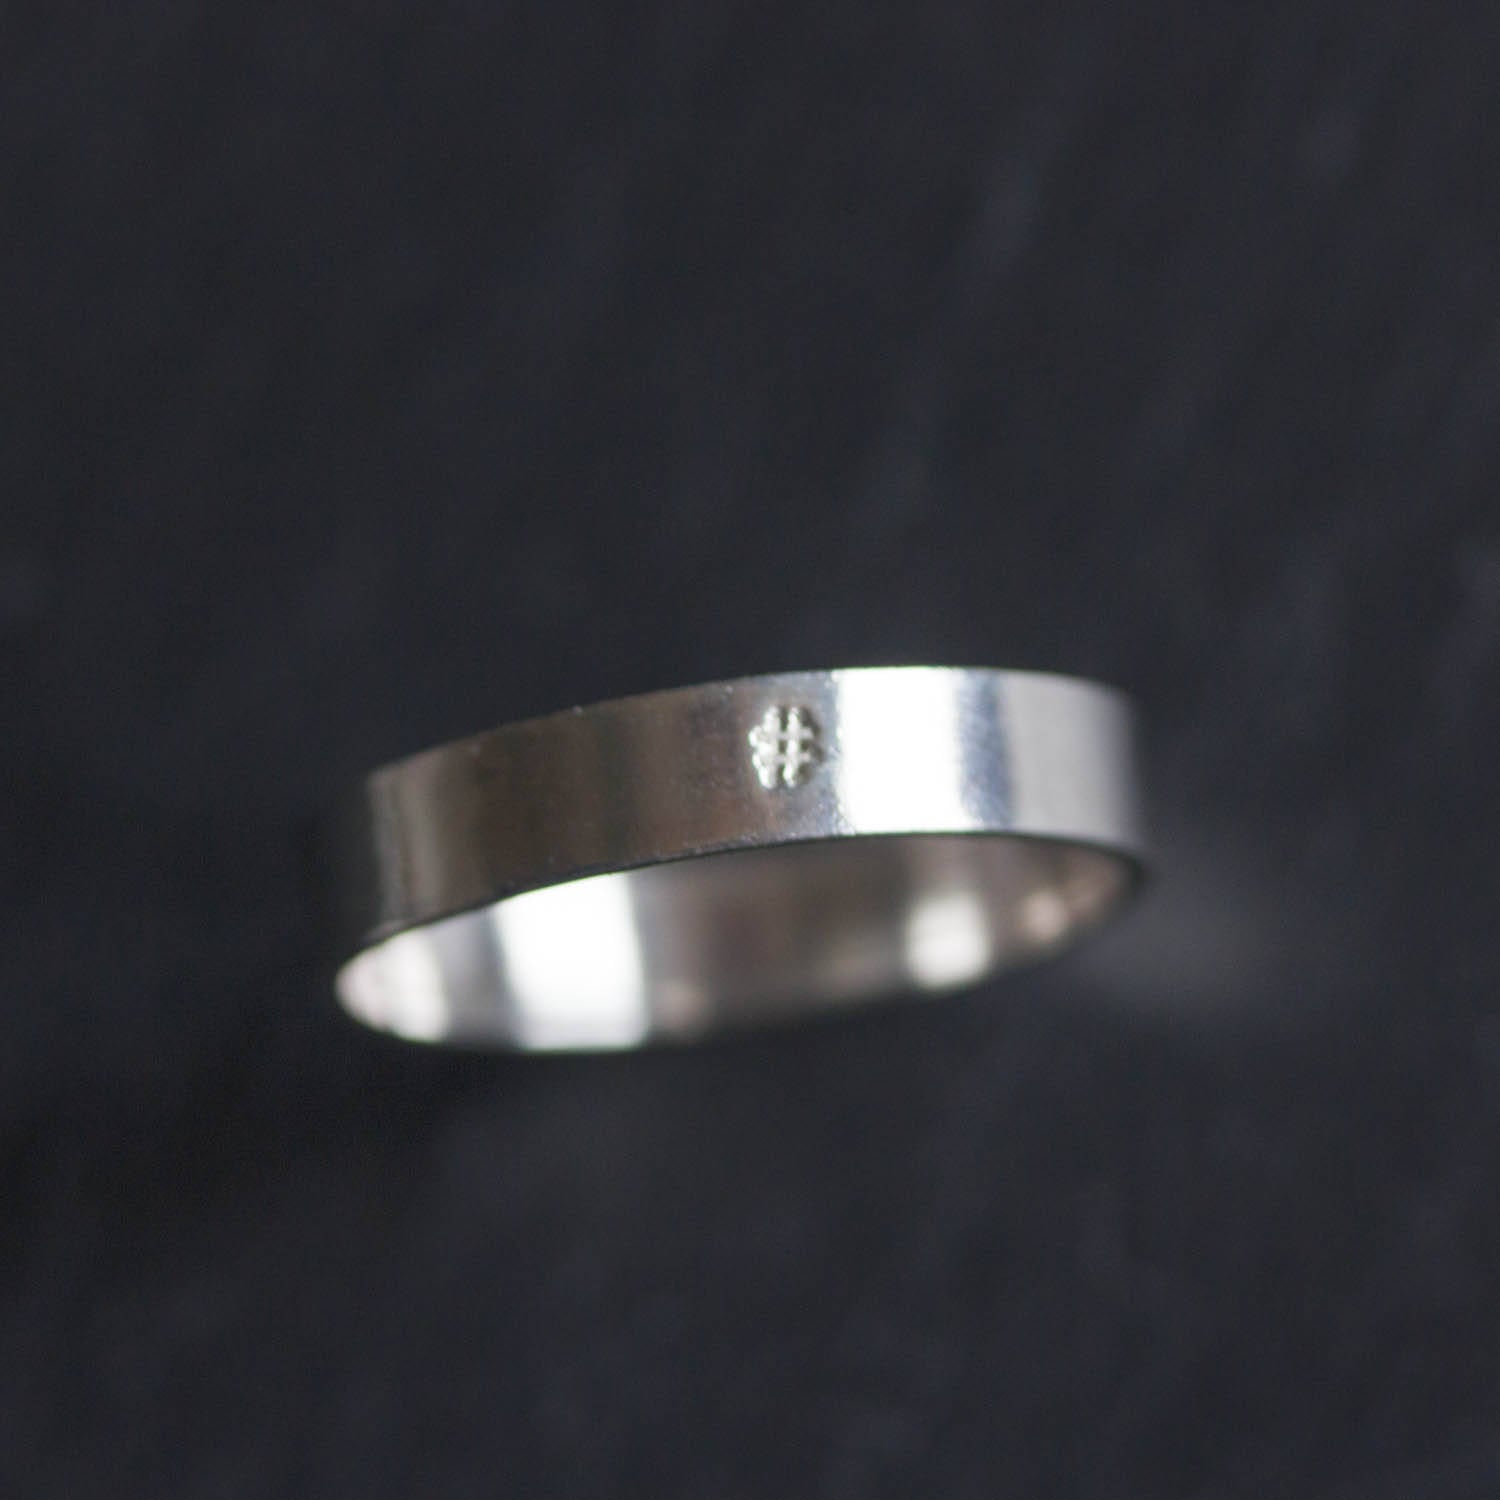 Hashtag ring - hand stamped sterling silver ring